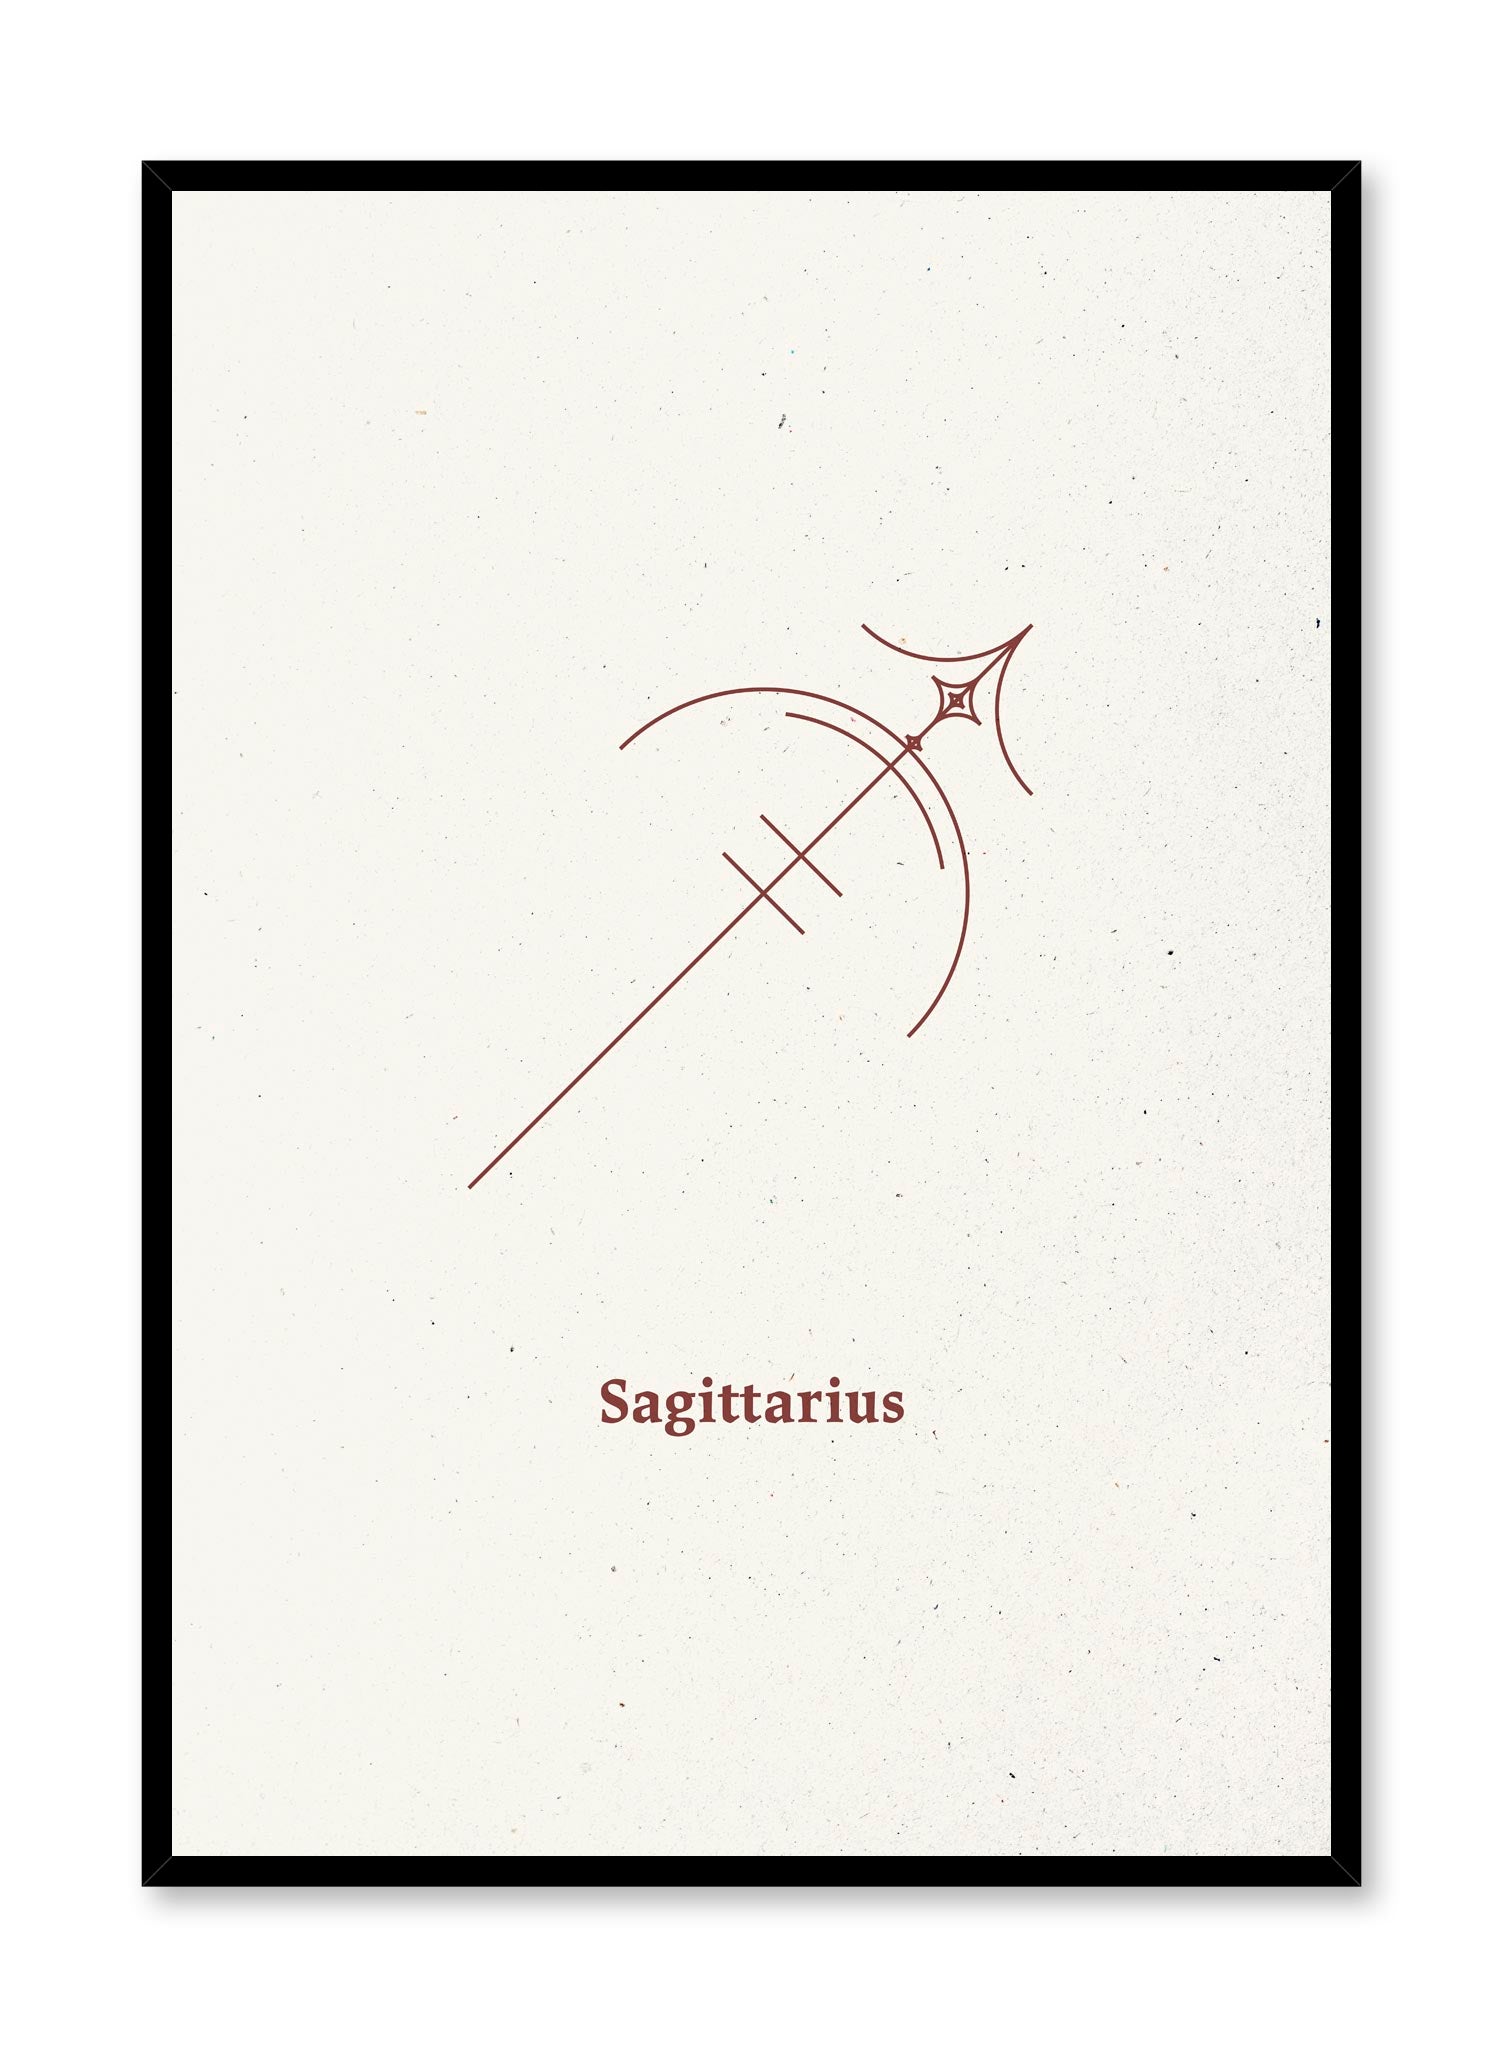 Minimalist celestial illustration poster by Opposite Wall with Sagittarius symbol